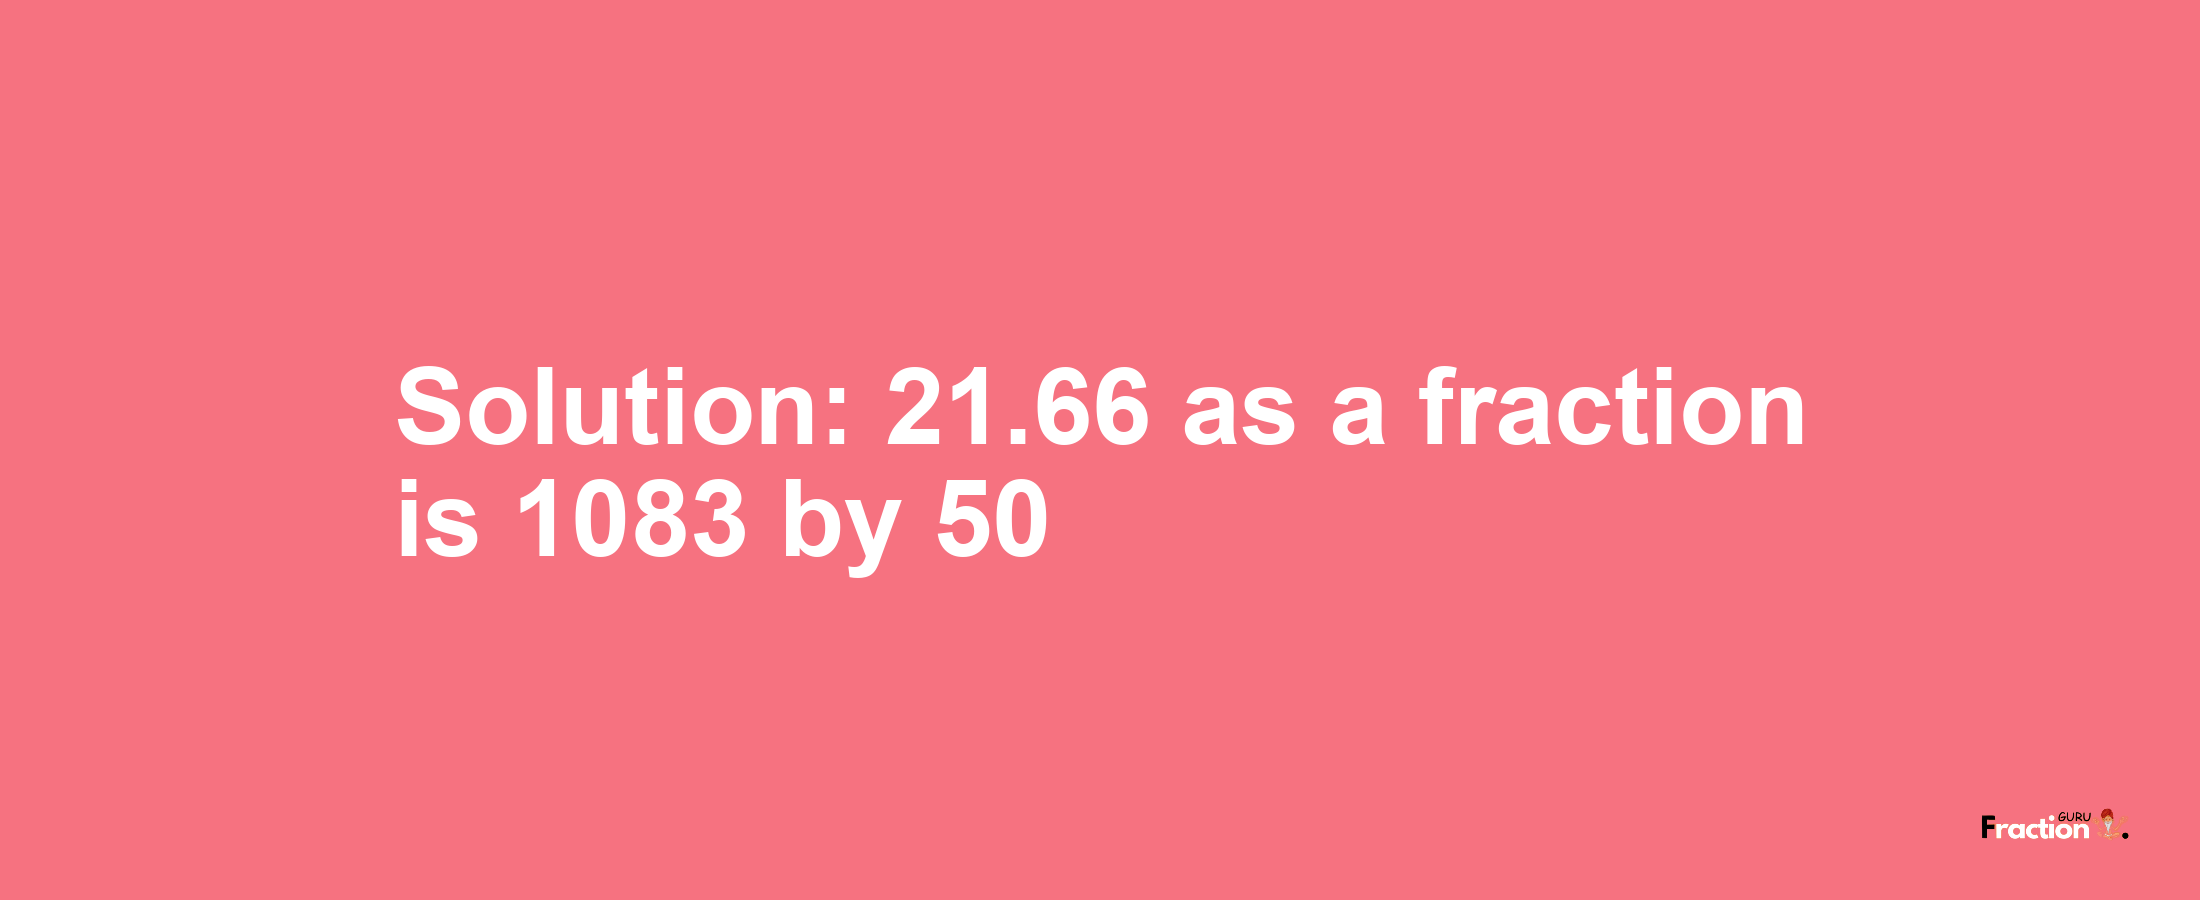 Solution:21.66 as a fraction is 1083/50